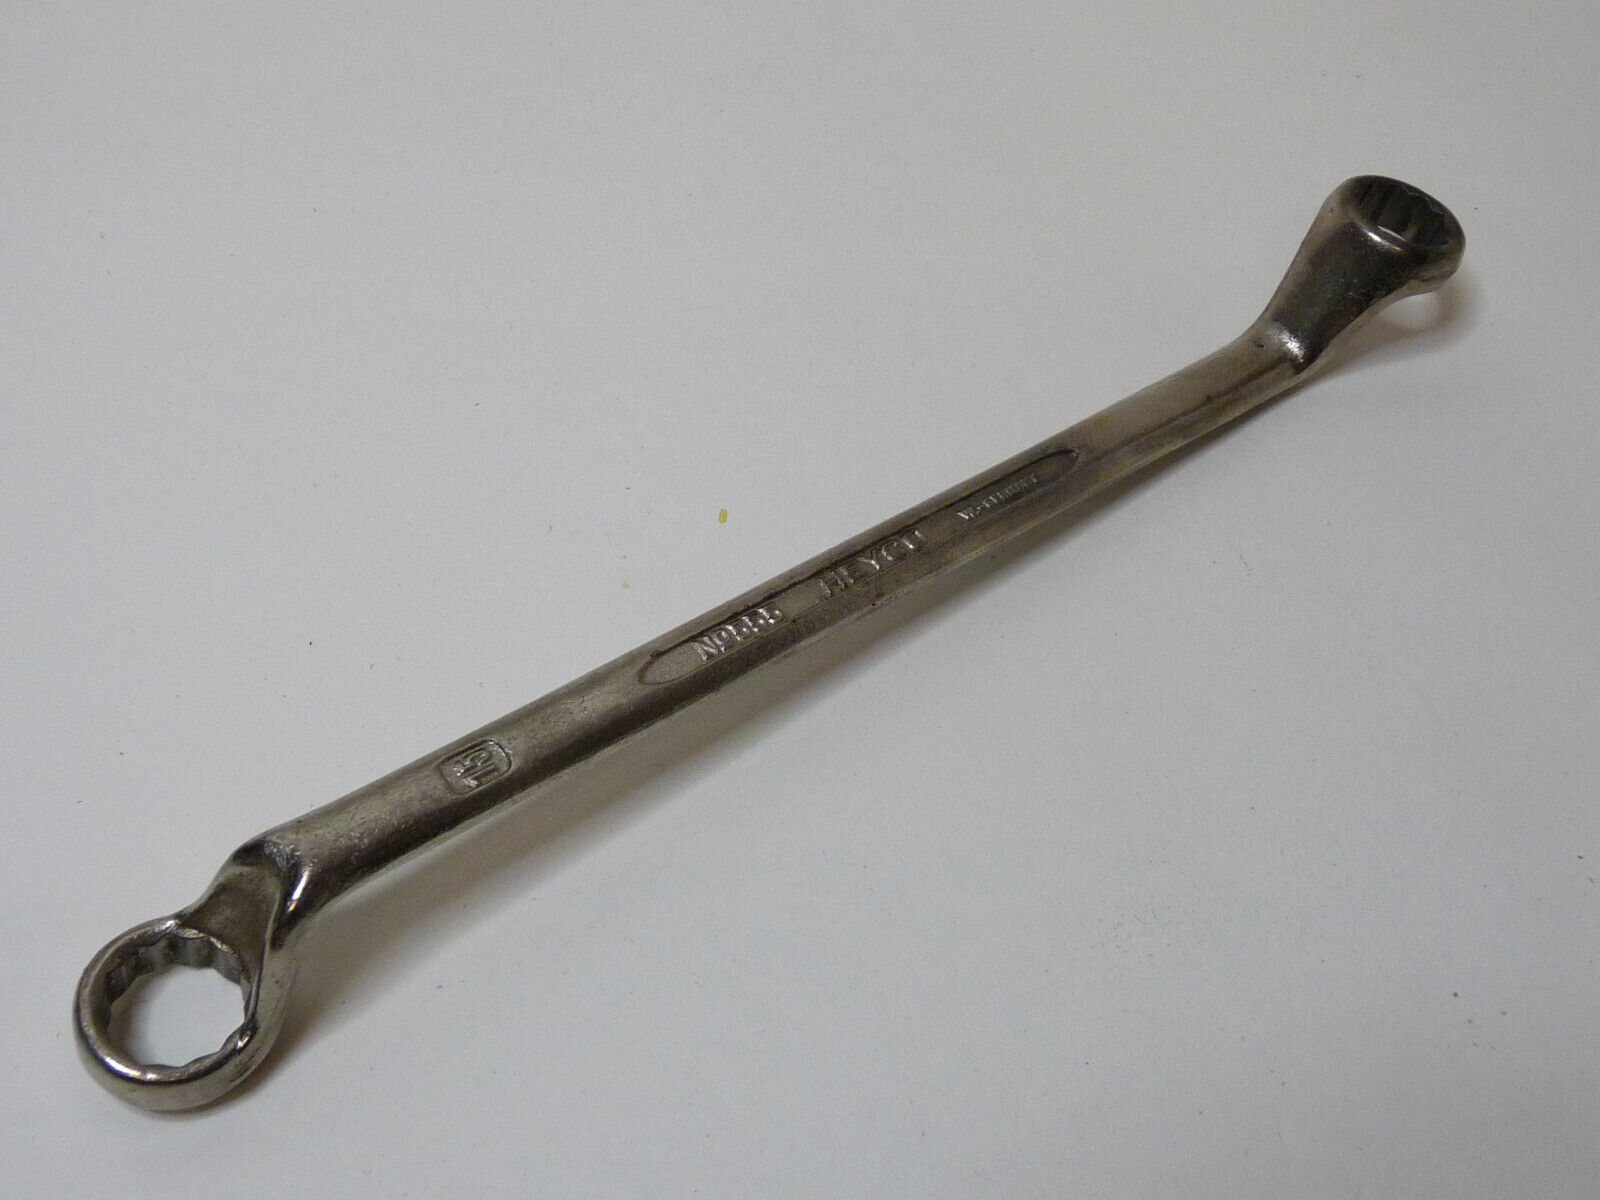 Vintage Heyco Ring Spanner No-555. 14mm x 15mm. made in W. Germany. Good & Clean